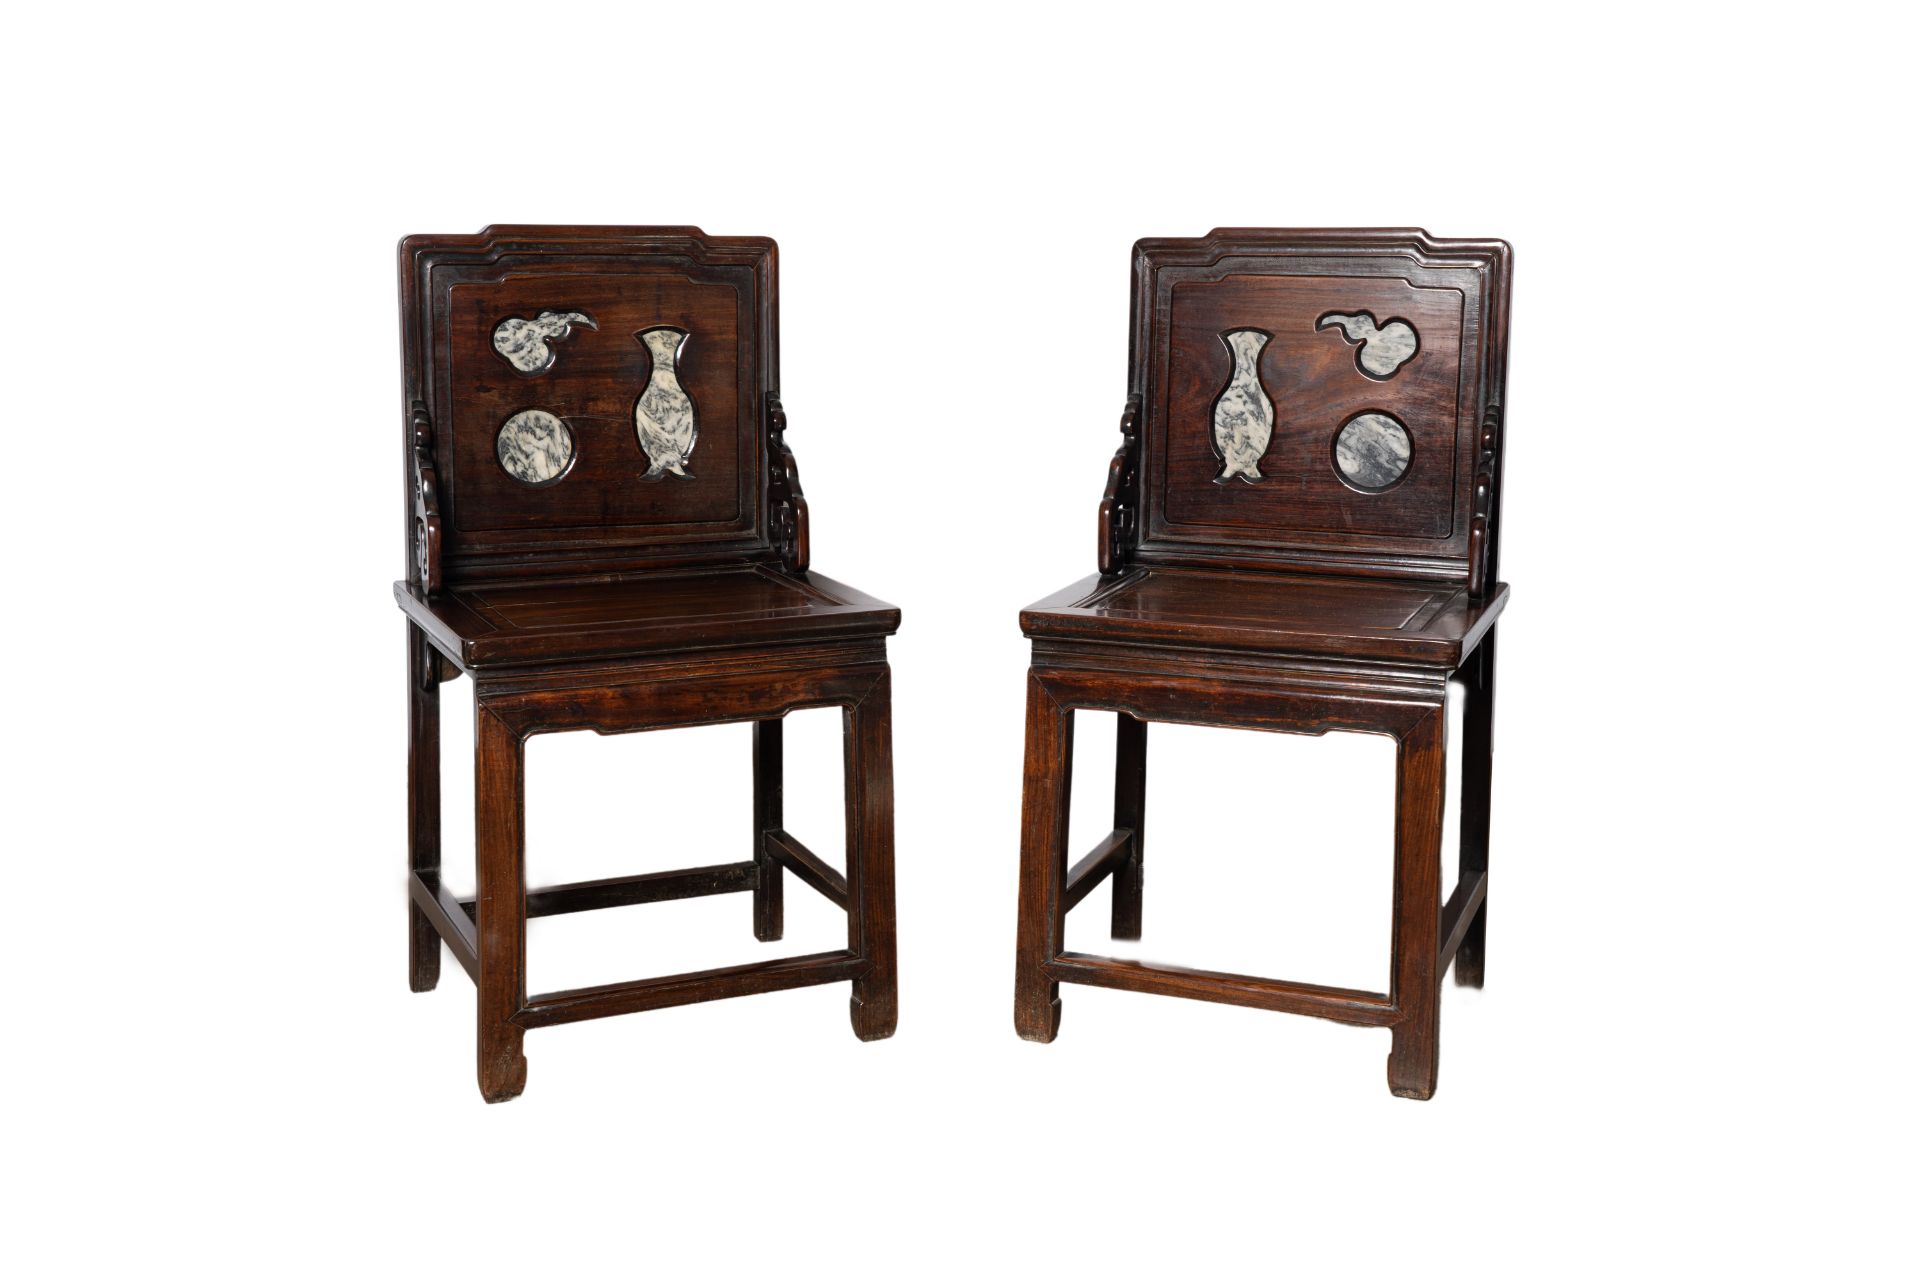 A pair of Chinese wood chairs with dreamstone plaques, 19th/20th C. - Image 2 of 8